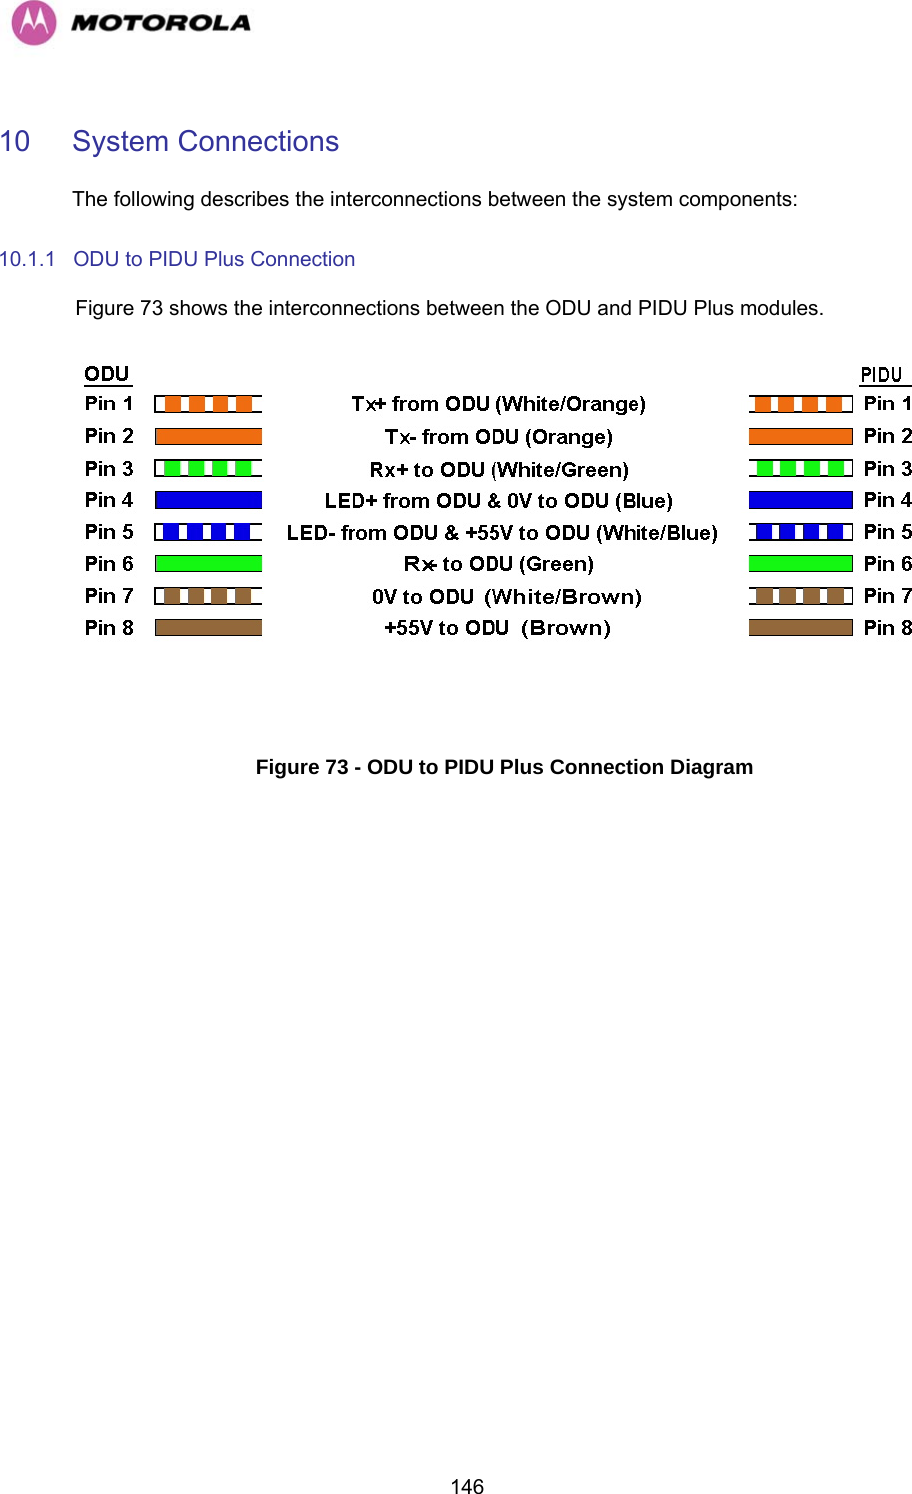   14610 System Connections  The following describes the interconnections between the system components: 10.1.1  ODU to PIDU Plus Connection HFigure 73 shows the interconnections between the ODU and PIDU Plus modules.         Figure 73 - ODU to PIDU Plus Connection Diagram 